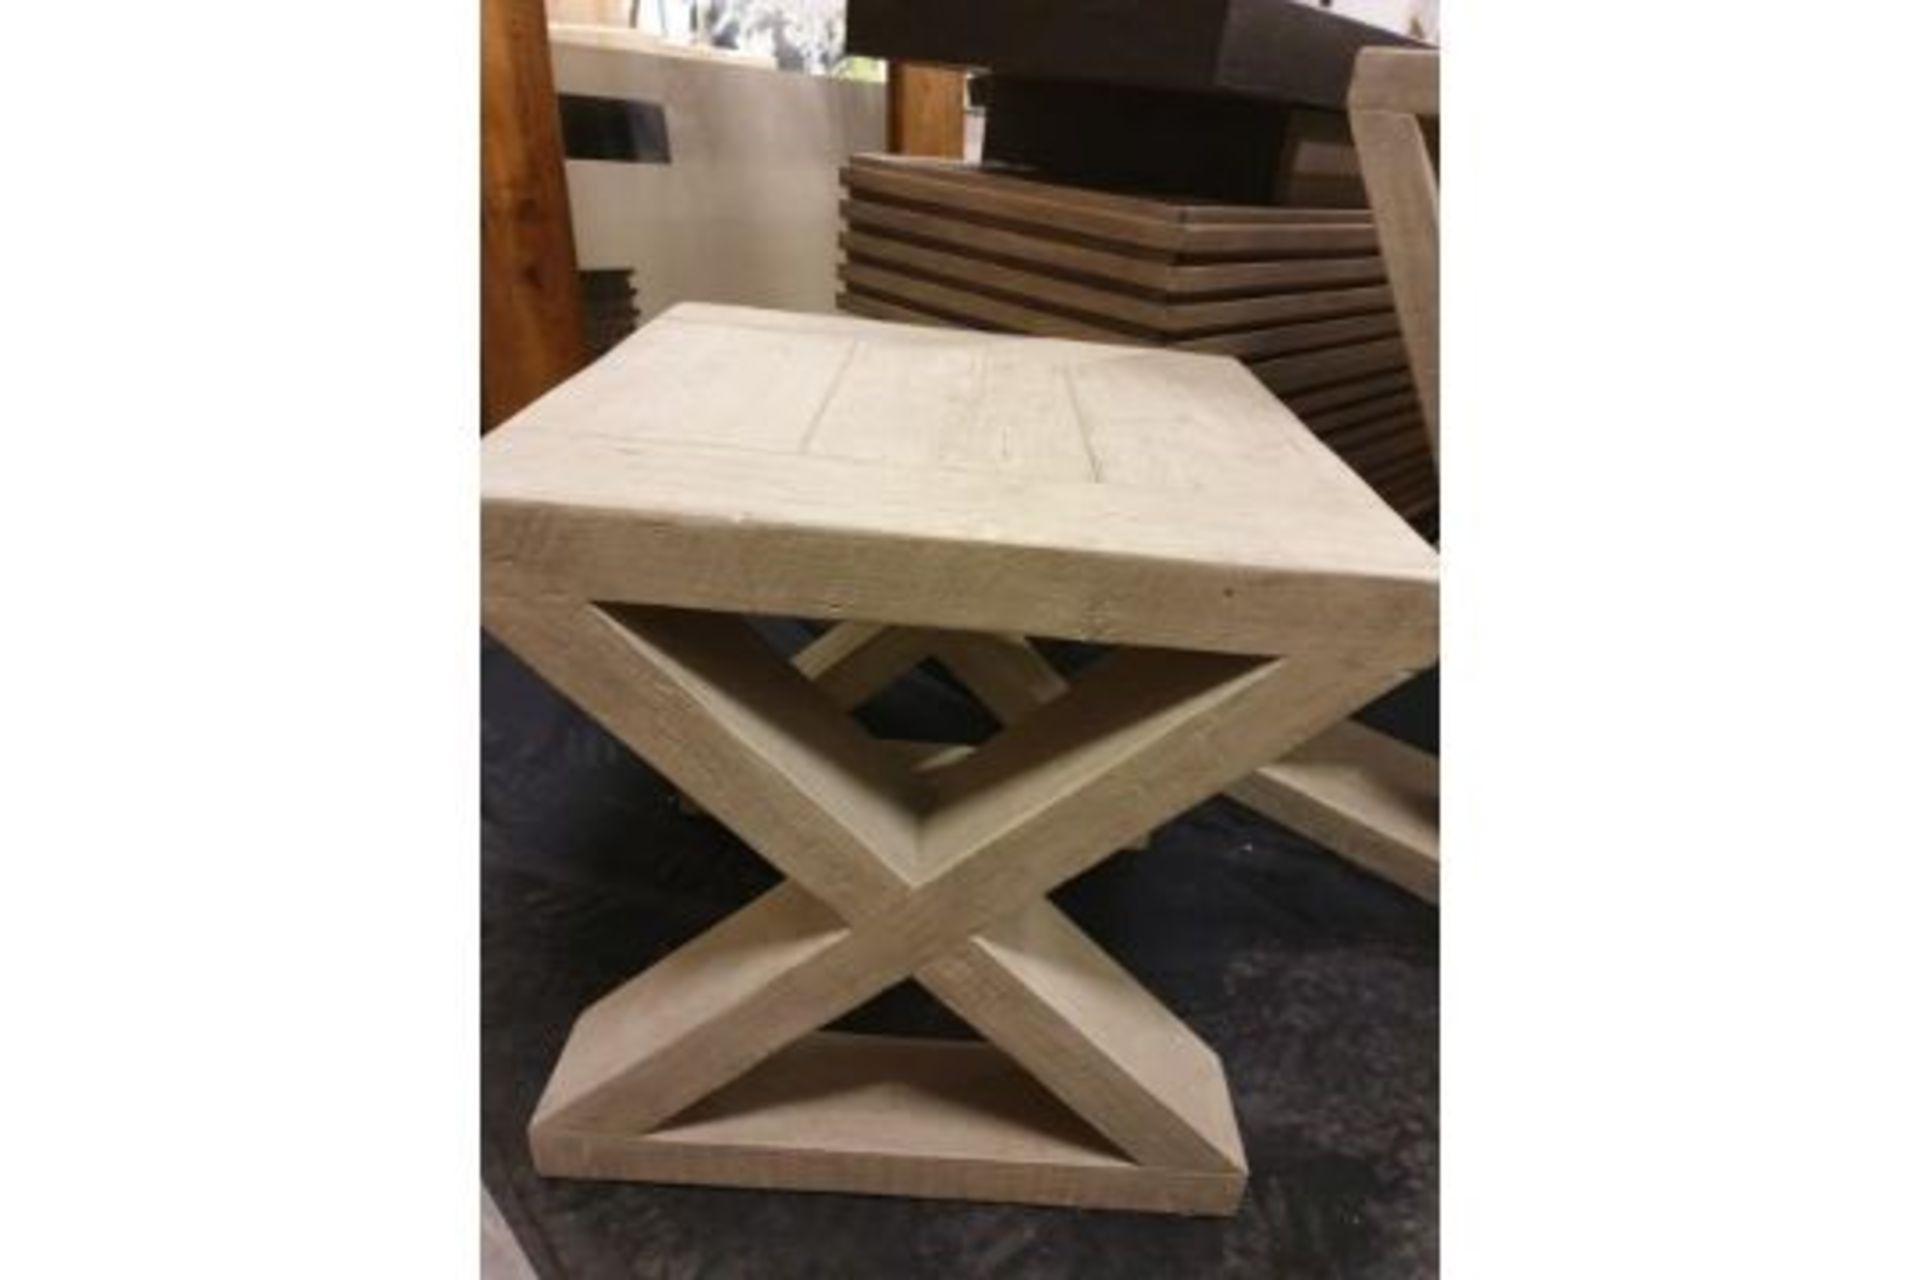 Rustic Side Table From Its Rustic Crisscrossing End Wooden Beams To The Vintage Texture Of The - Bild 2 aus 2